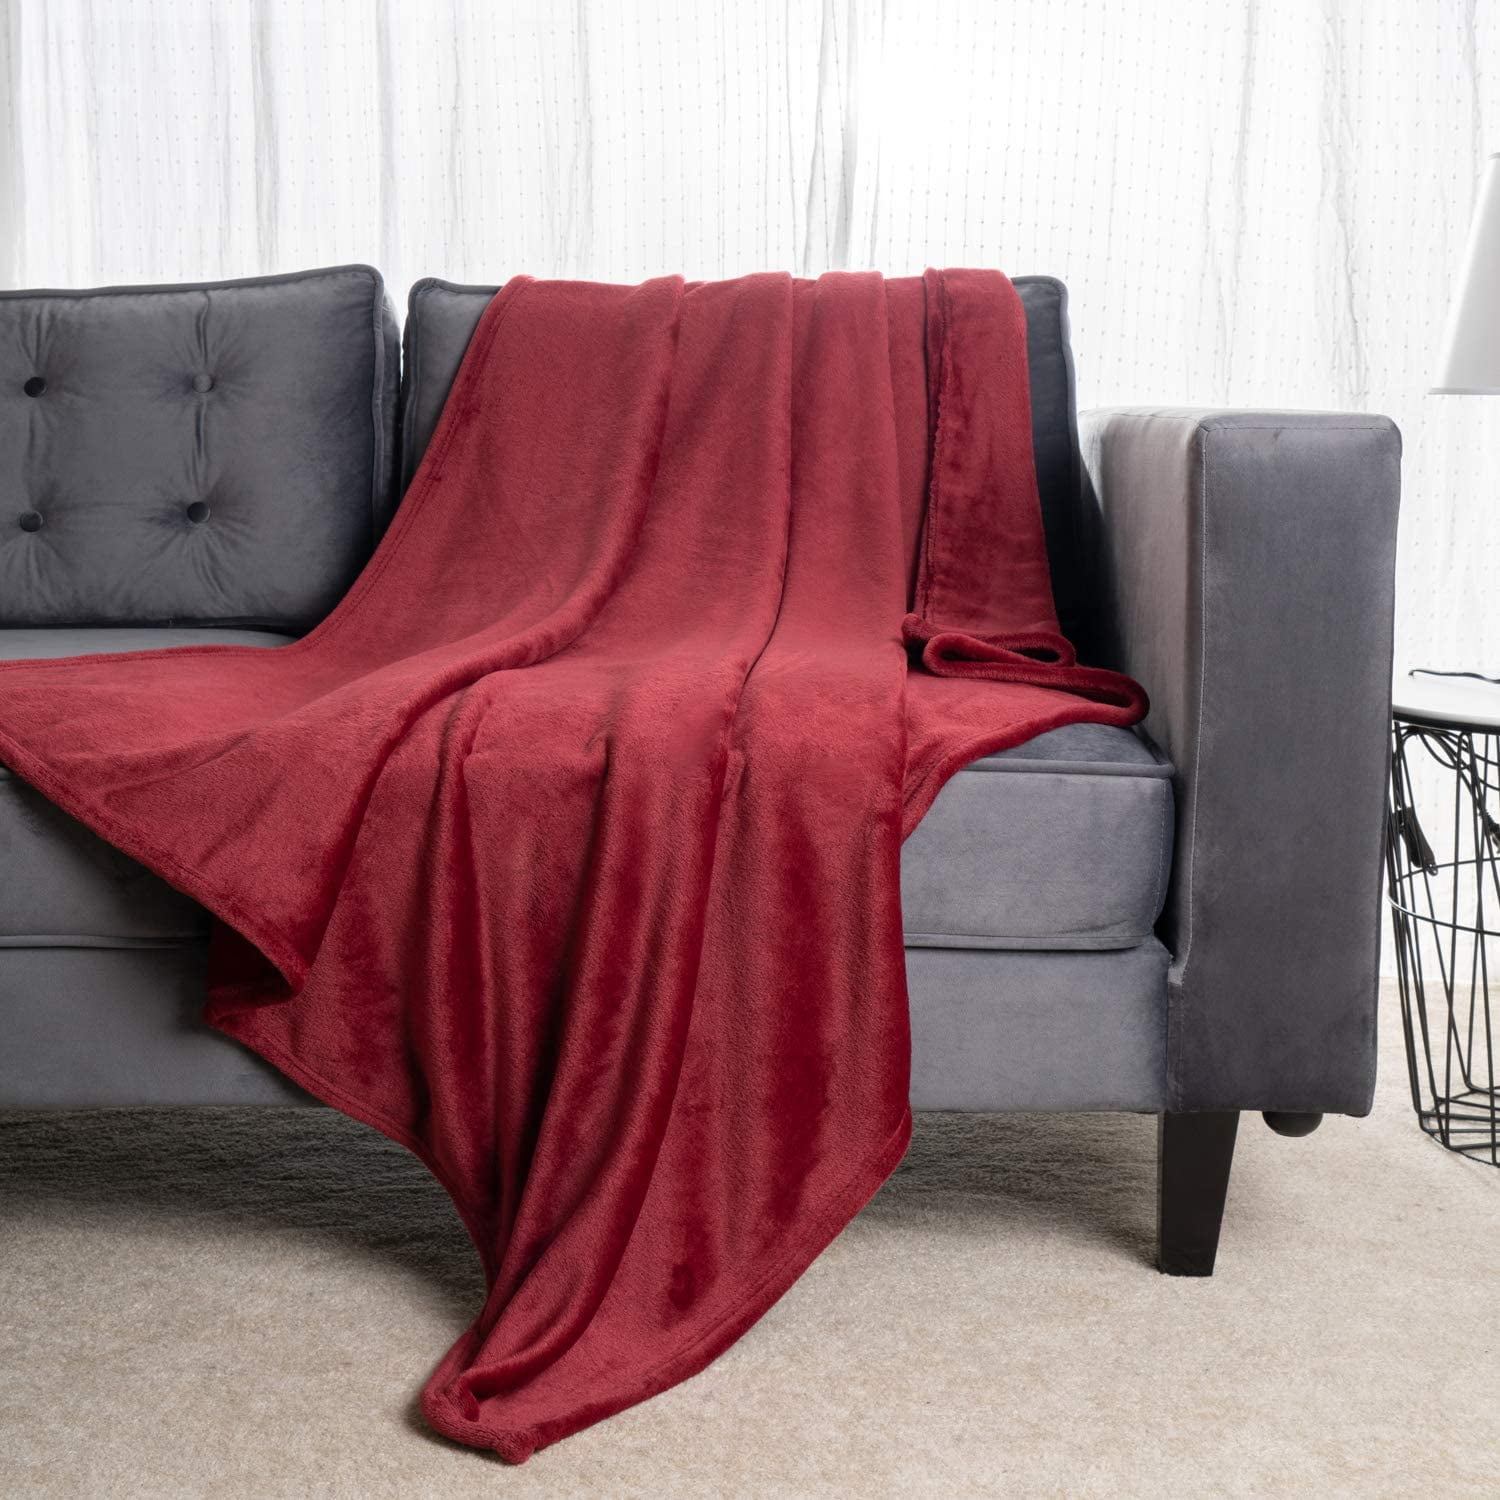 Lightweight Throw Blanket 50”×60” Details about   Flannel Fleece Blanket For Bed Couch Sofa